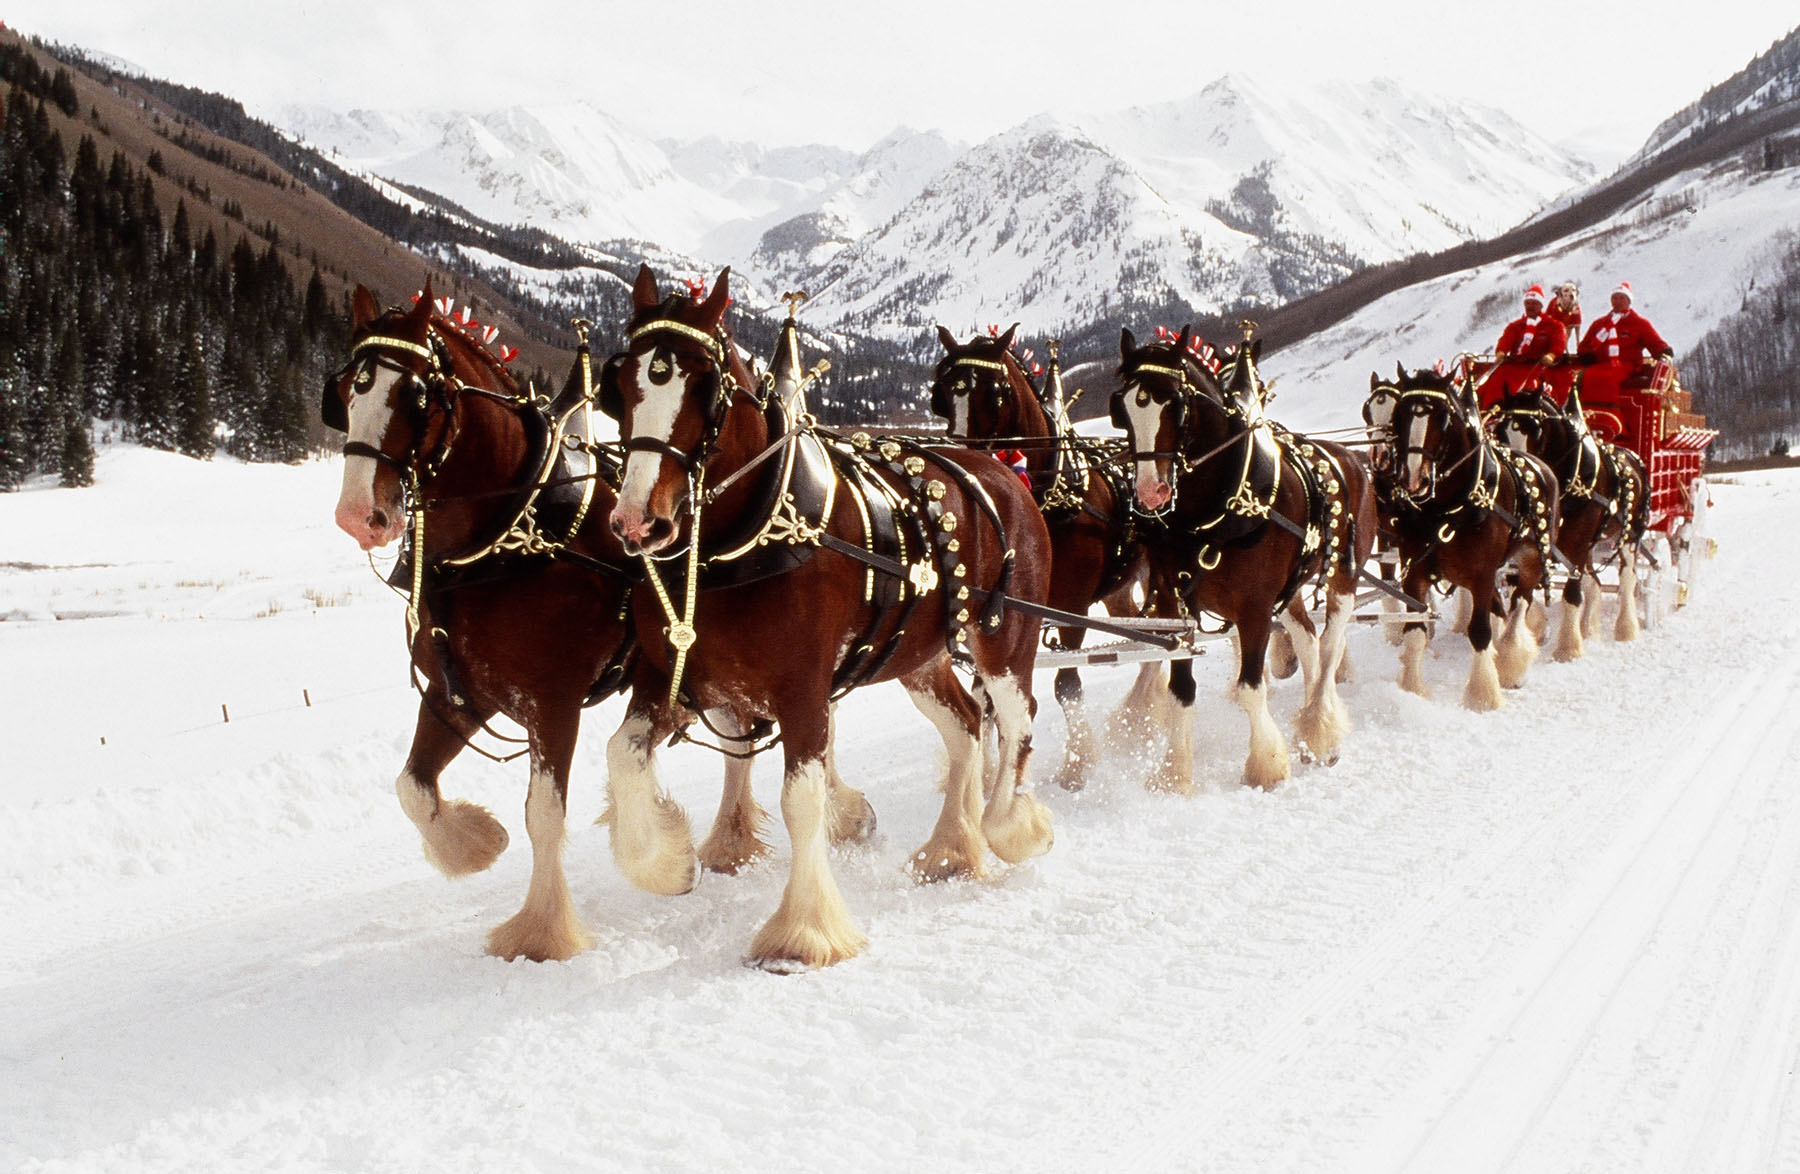 World renowned Budweiser Clydesdales to appear at museum > National ...